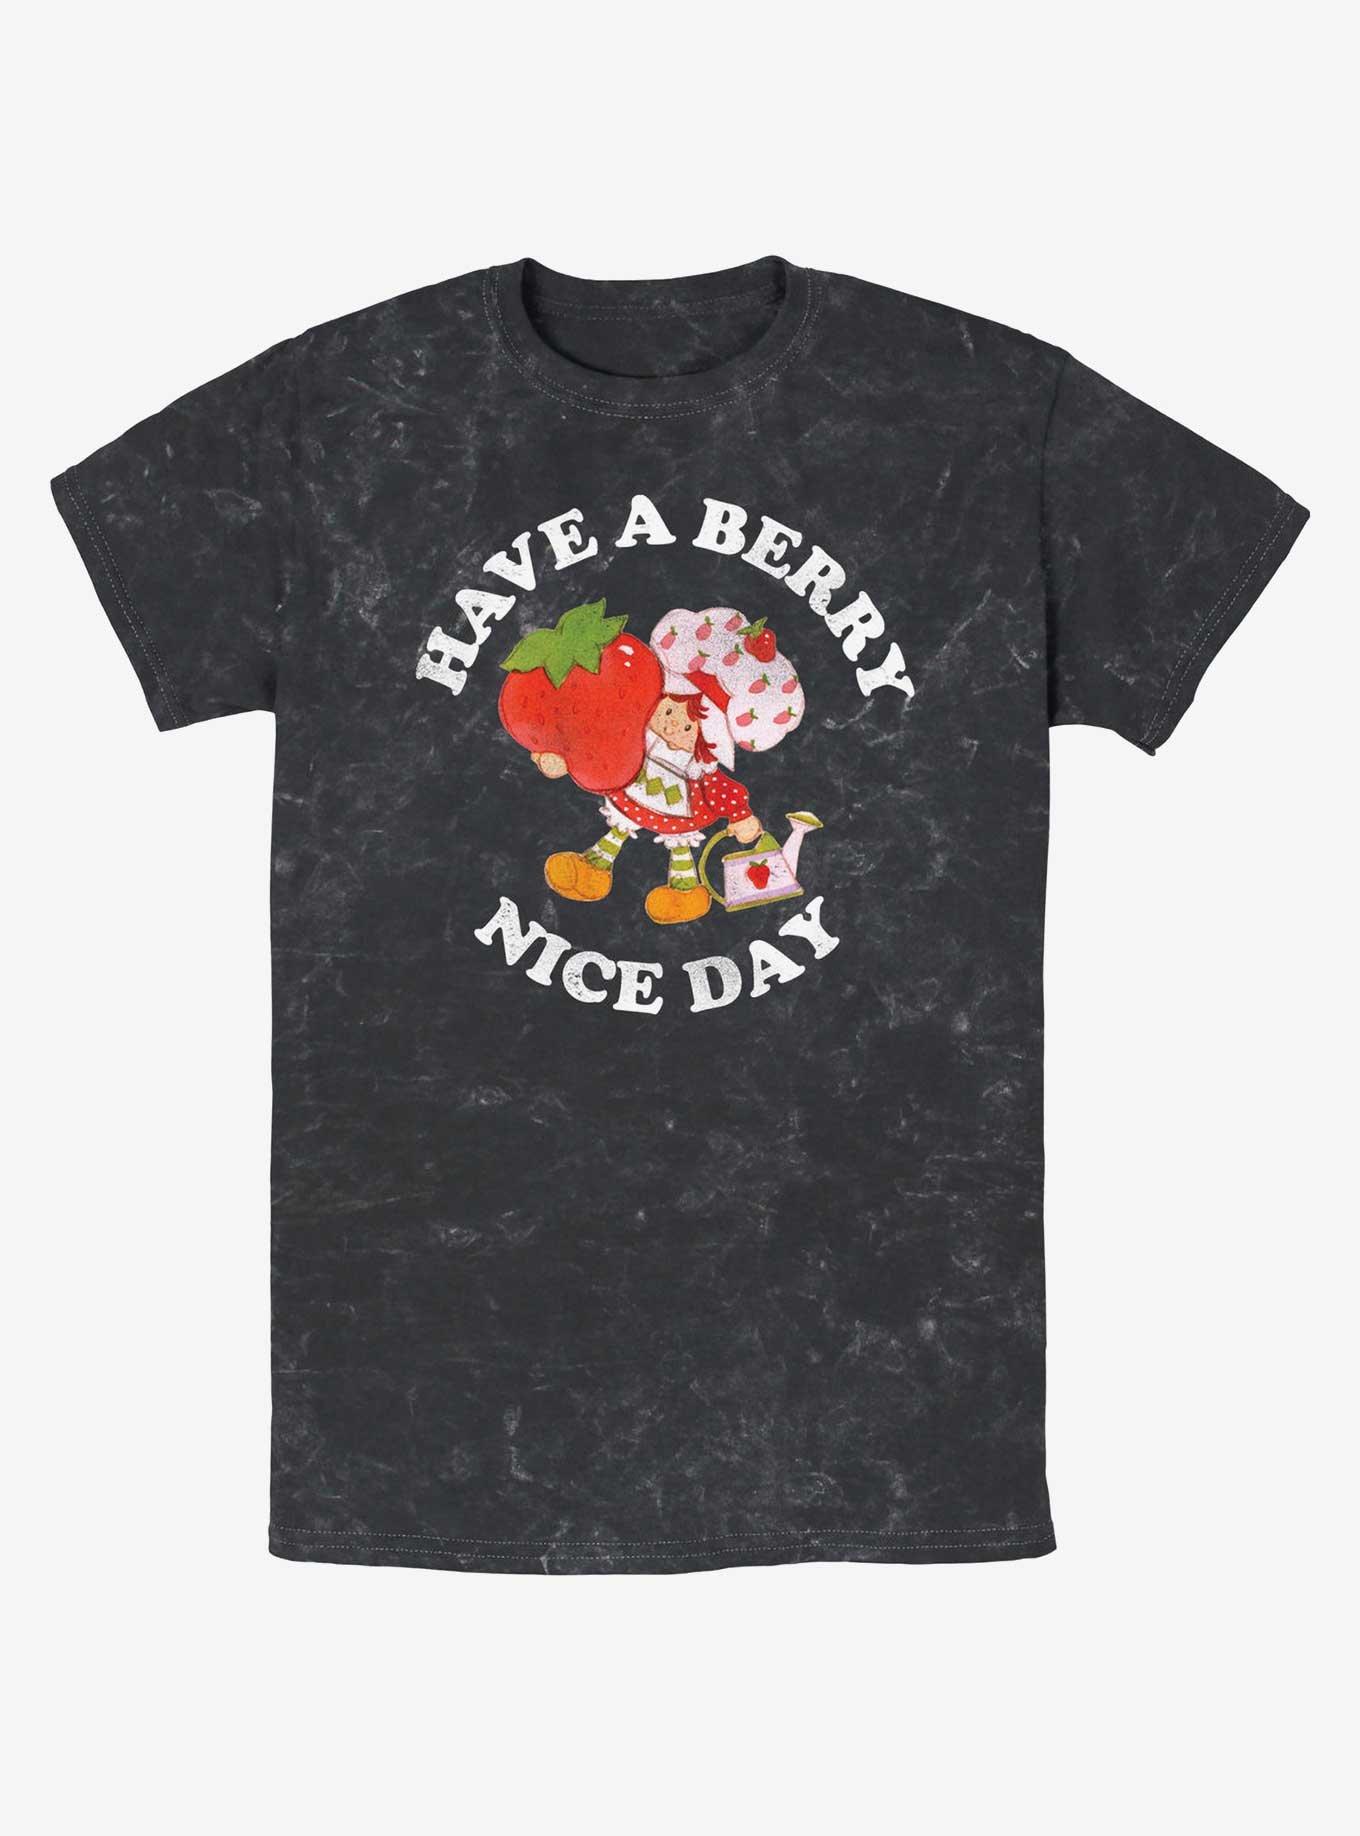 Strawberry Shortcake Have A Berry Nice Day Mineral Wash T-Shirt, , hi-res